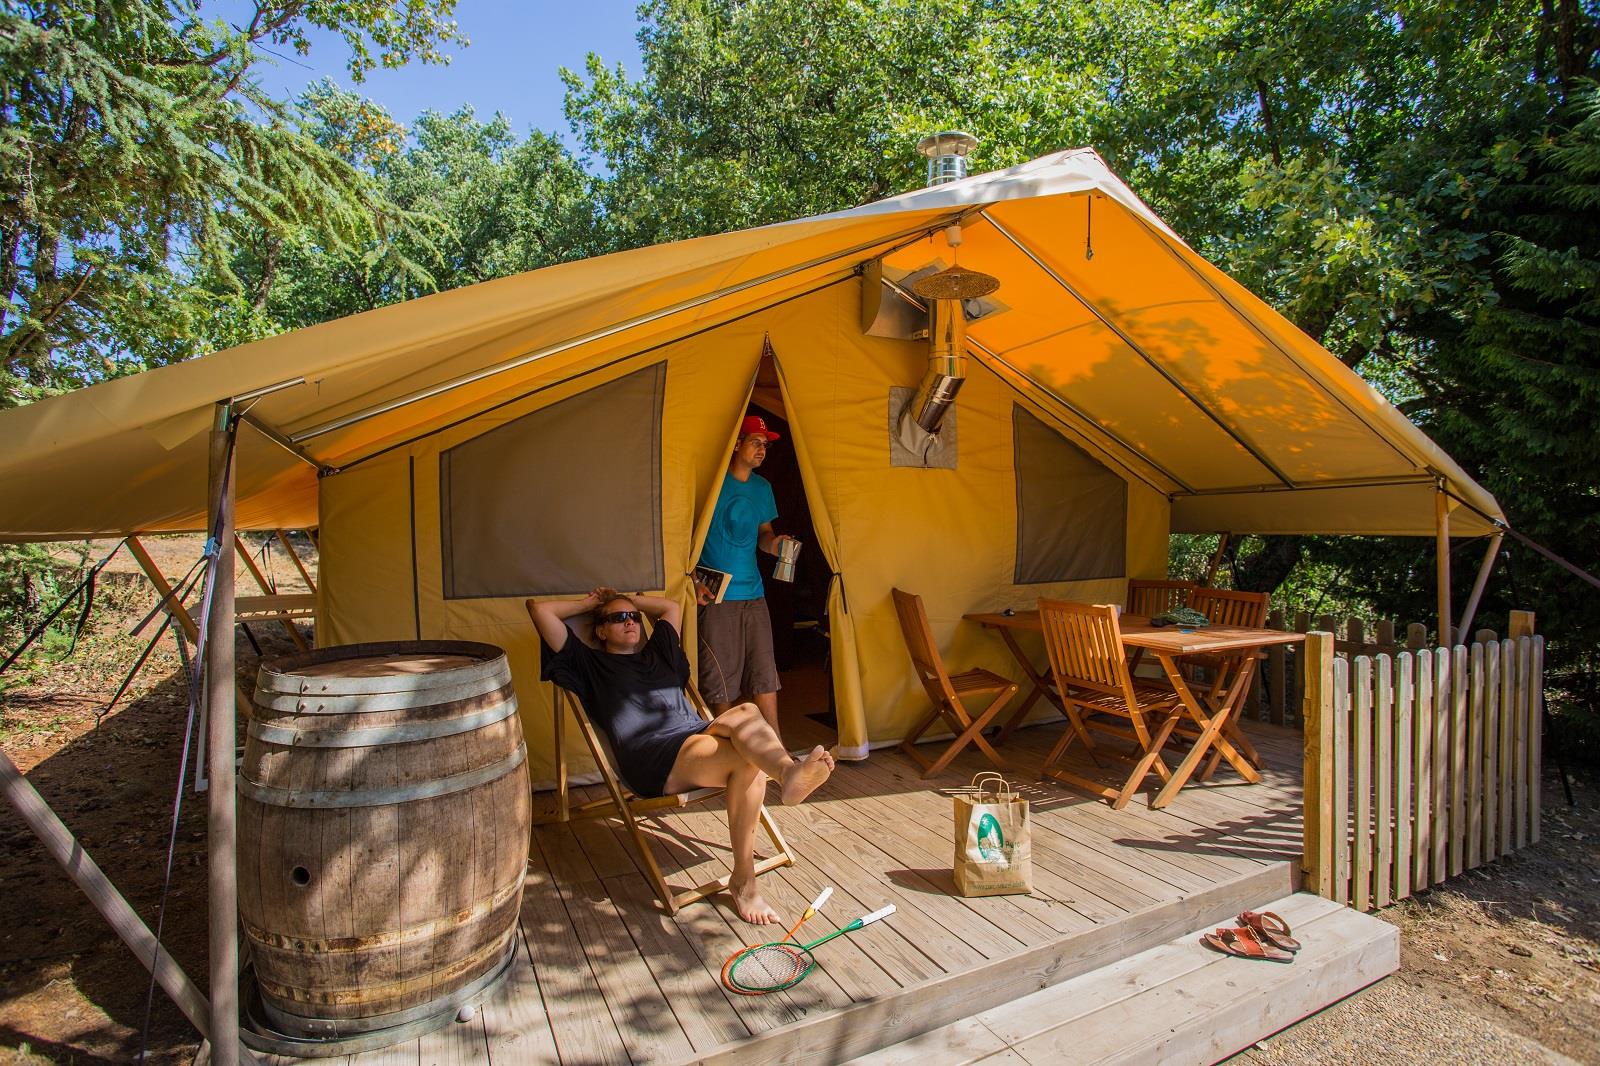 Accommodation - Tent Wine Lodge With Cozy Comfort For Evenings Around A Wood Stove - Camping Bel'époque du Pilat